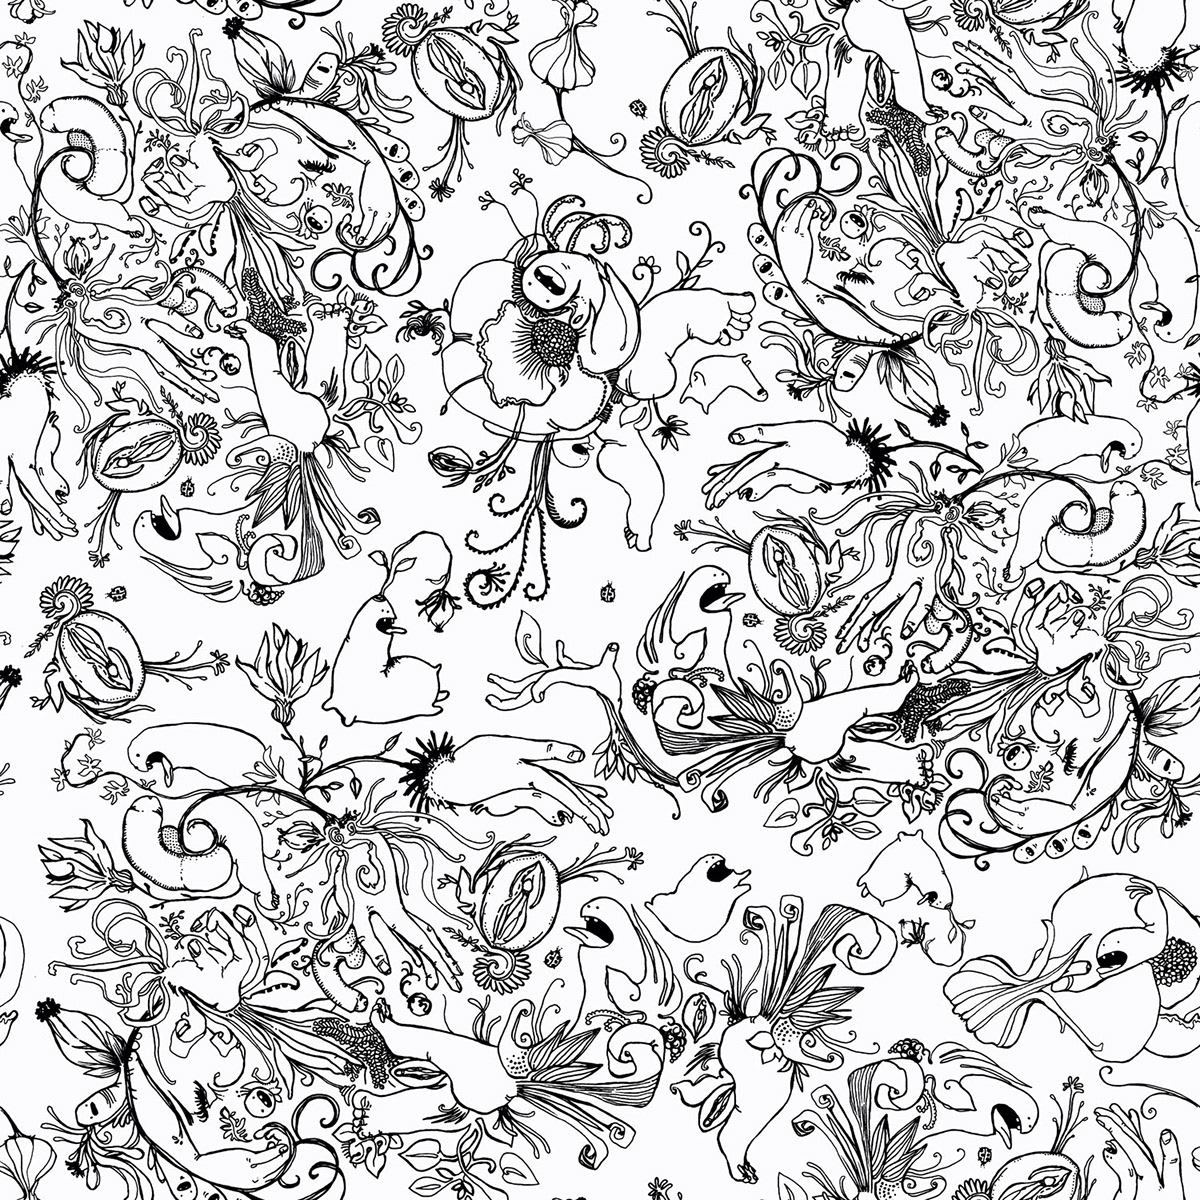 Repeat Pattern Textiles monsters floral feet Flowers